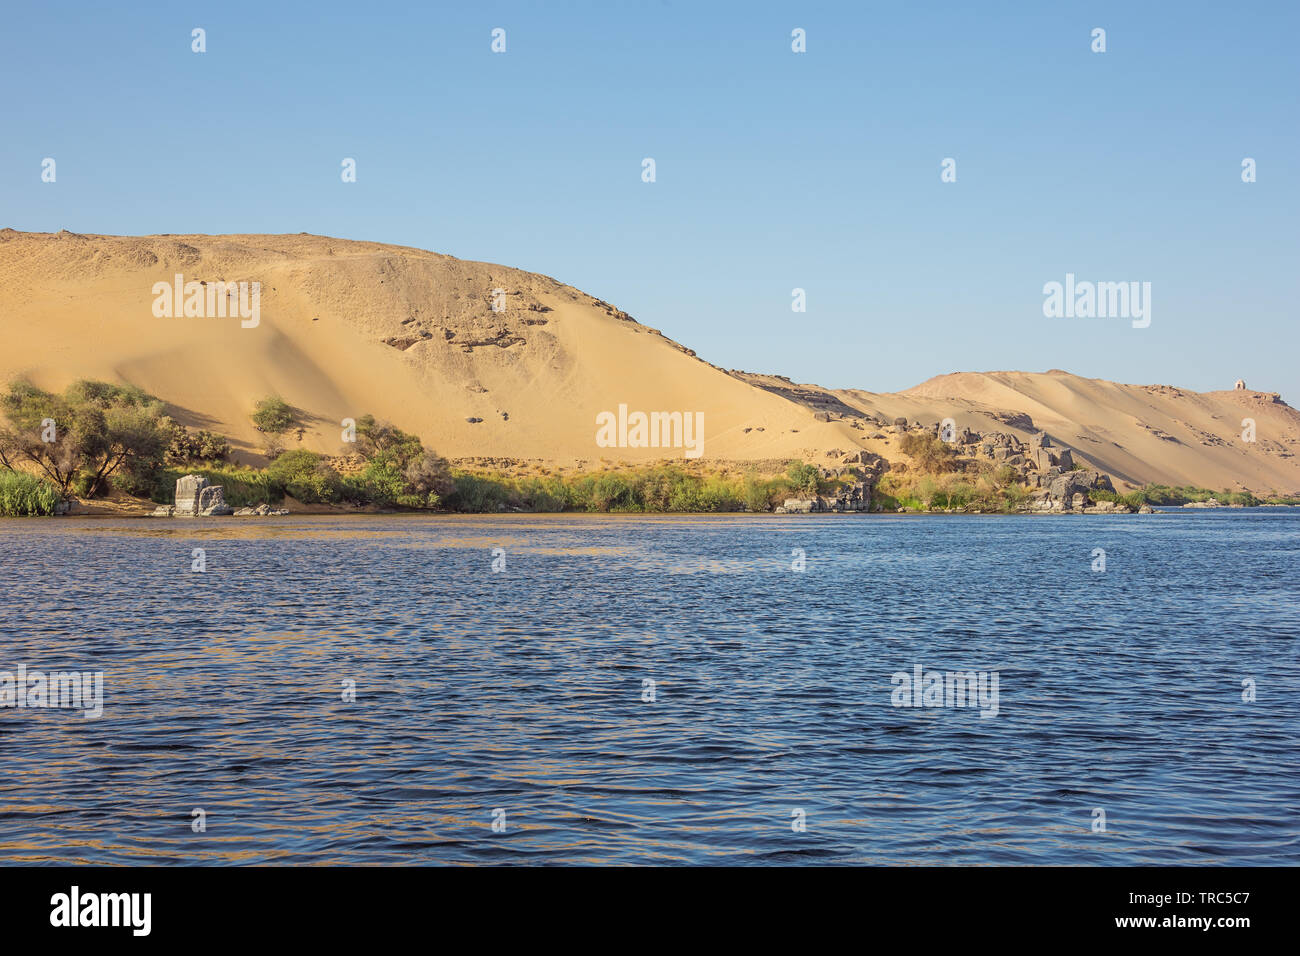 The desert with the shore of the Nile close to Aswan Stock Photo